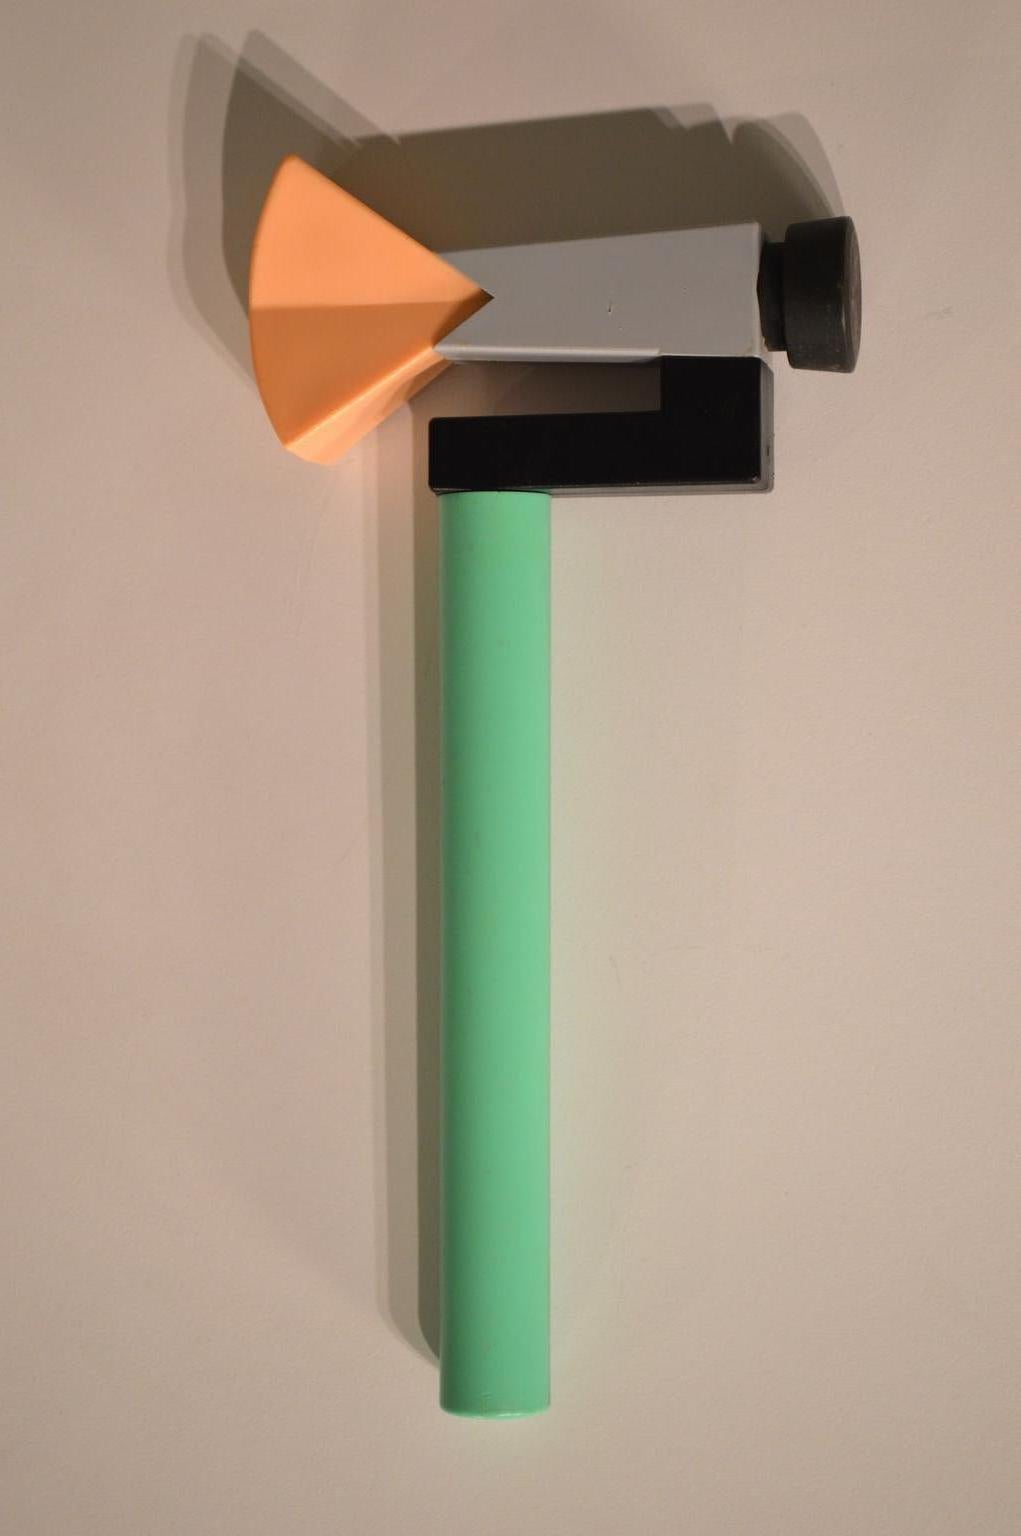 A rare Memphis-inspired design, part of a tool kit made by Koyo Sangyo of Japan, circa 1980's. Although functional, this hammer makes a unique design accent. 

Playful colors and an unusual C-shaped form, made primarily of molded plastic, the weight